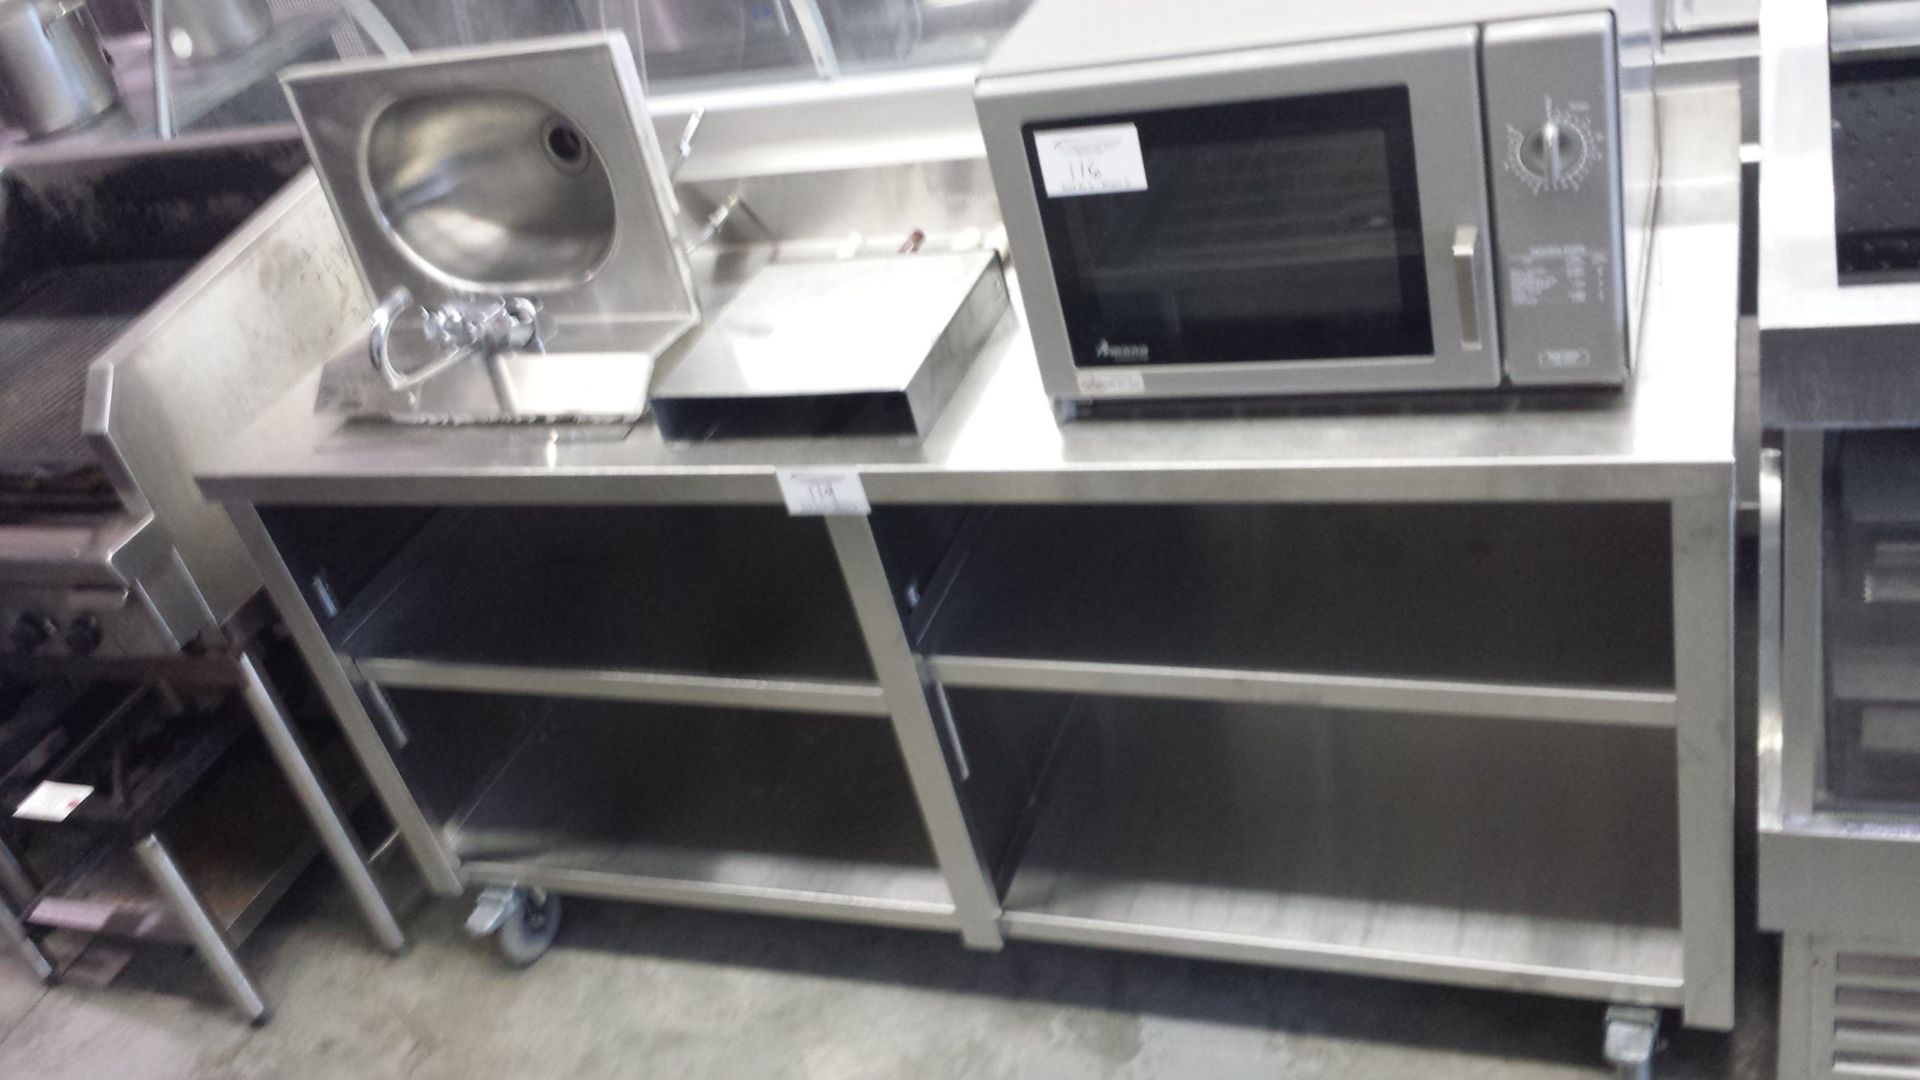 3 Tier Custom built 68 x 2" Stainless steel counter with back splash on casters